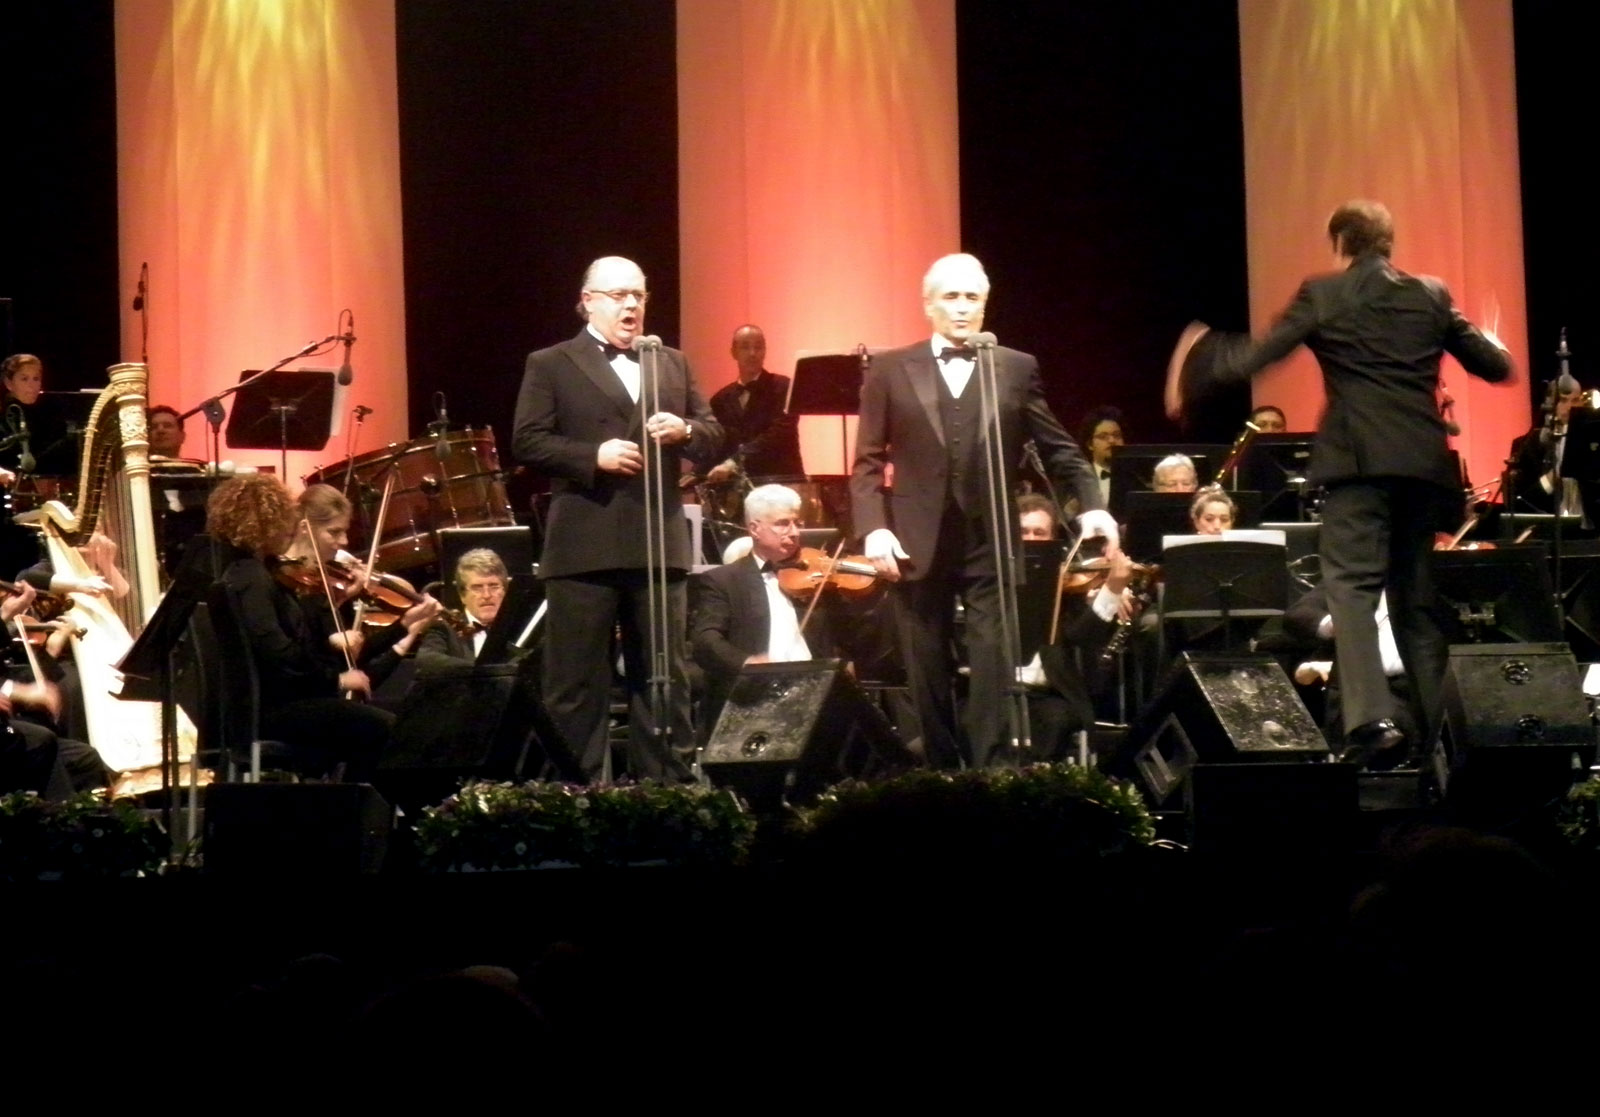 sldr_Performing_with_Jose_Carreras_March_2009